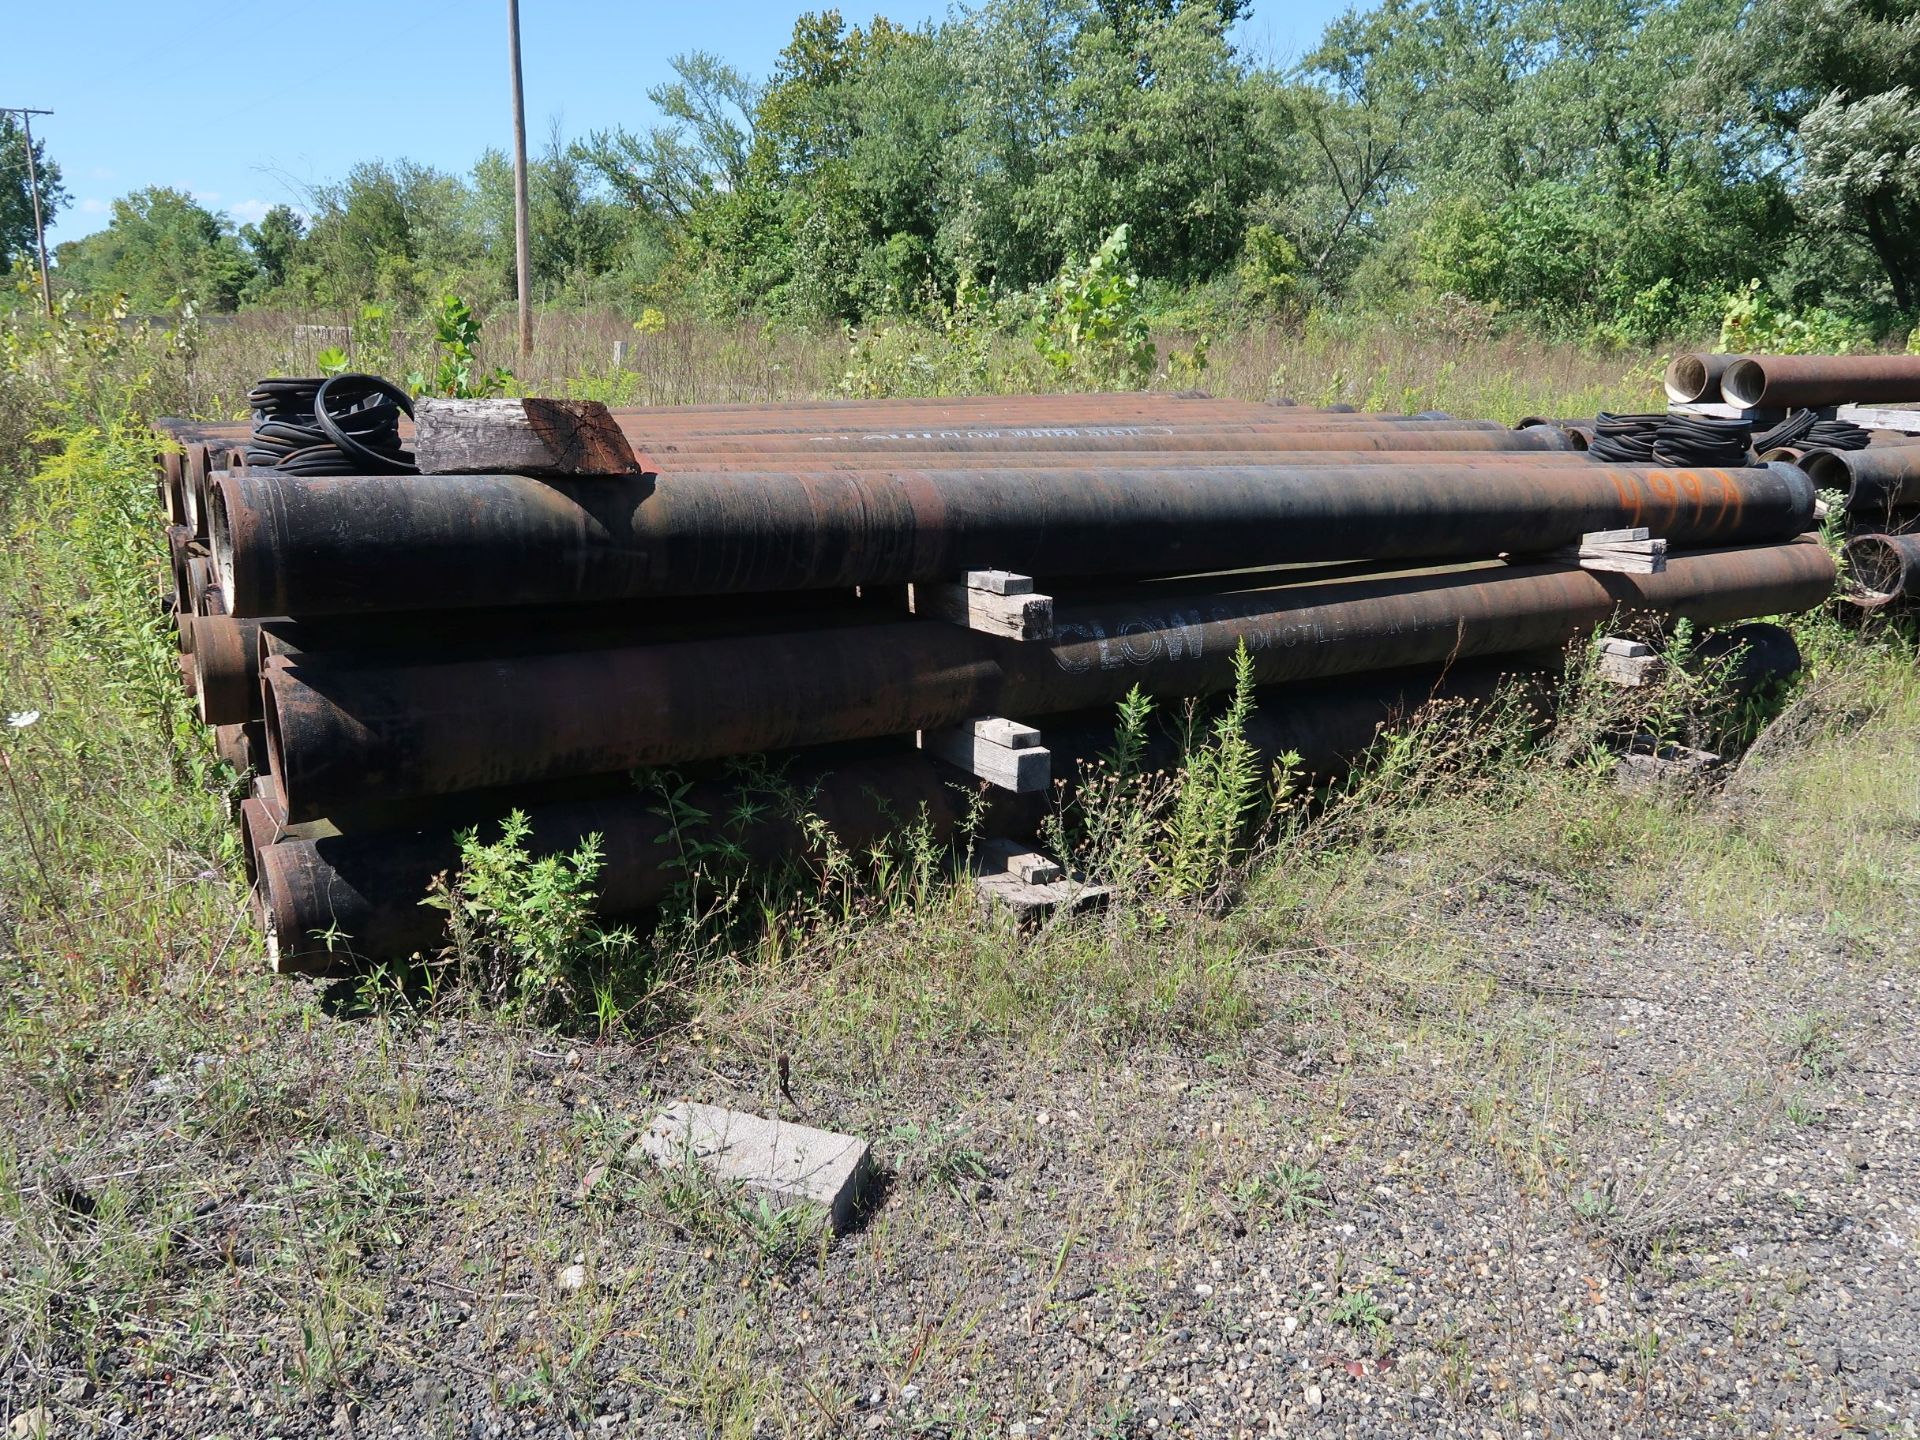 (LOT) CLOW DUCTILE IRON PIPE (10" ID X 18' LONG) APPROX. (75) JOINTS AND (6) PIECES OF ASSORTED